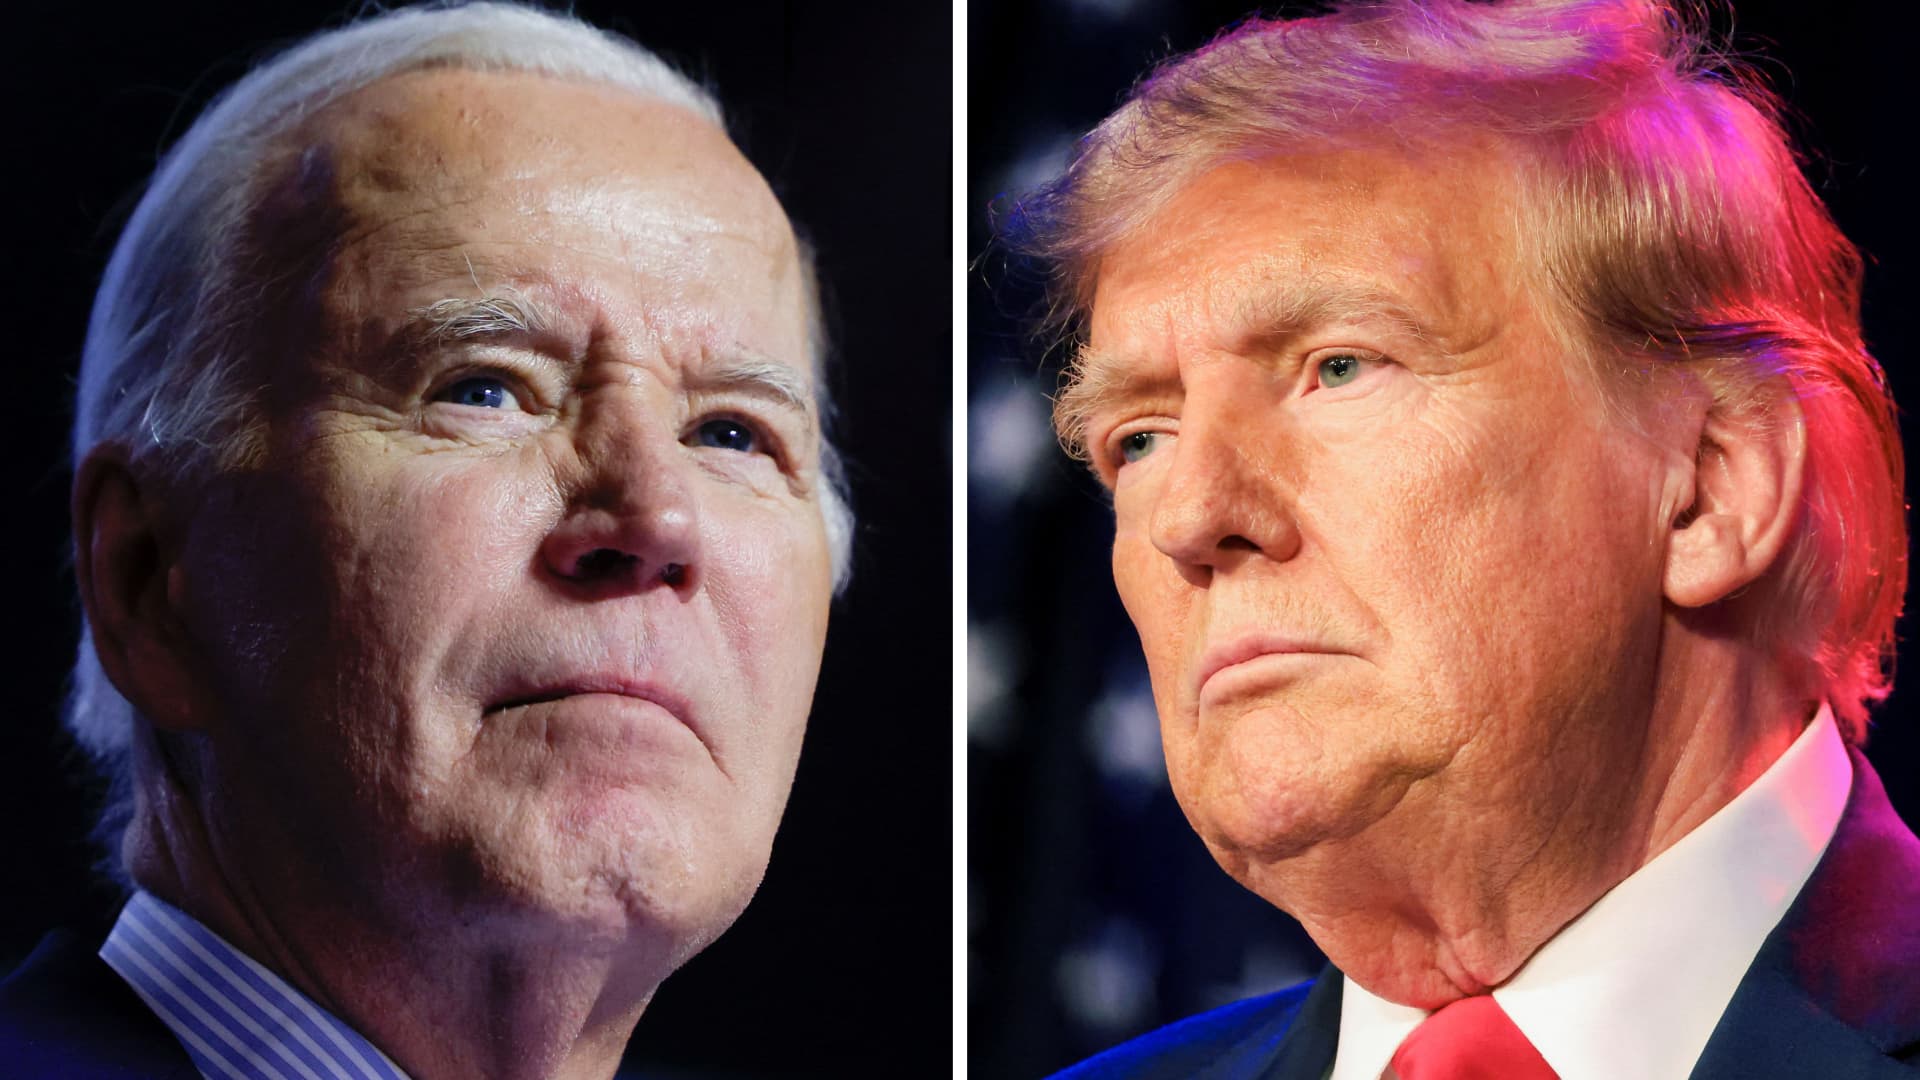 Biden pulls even with Trump as economic view improves slightly, CNBC survey shows